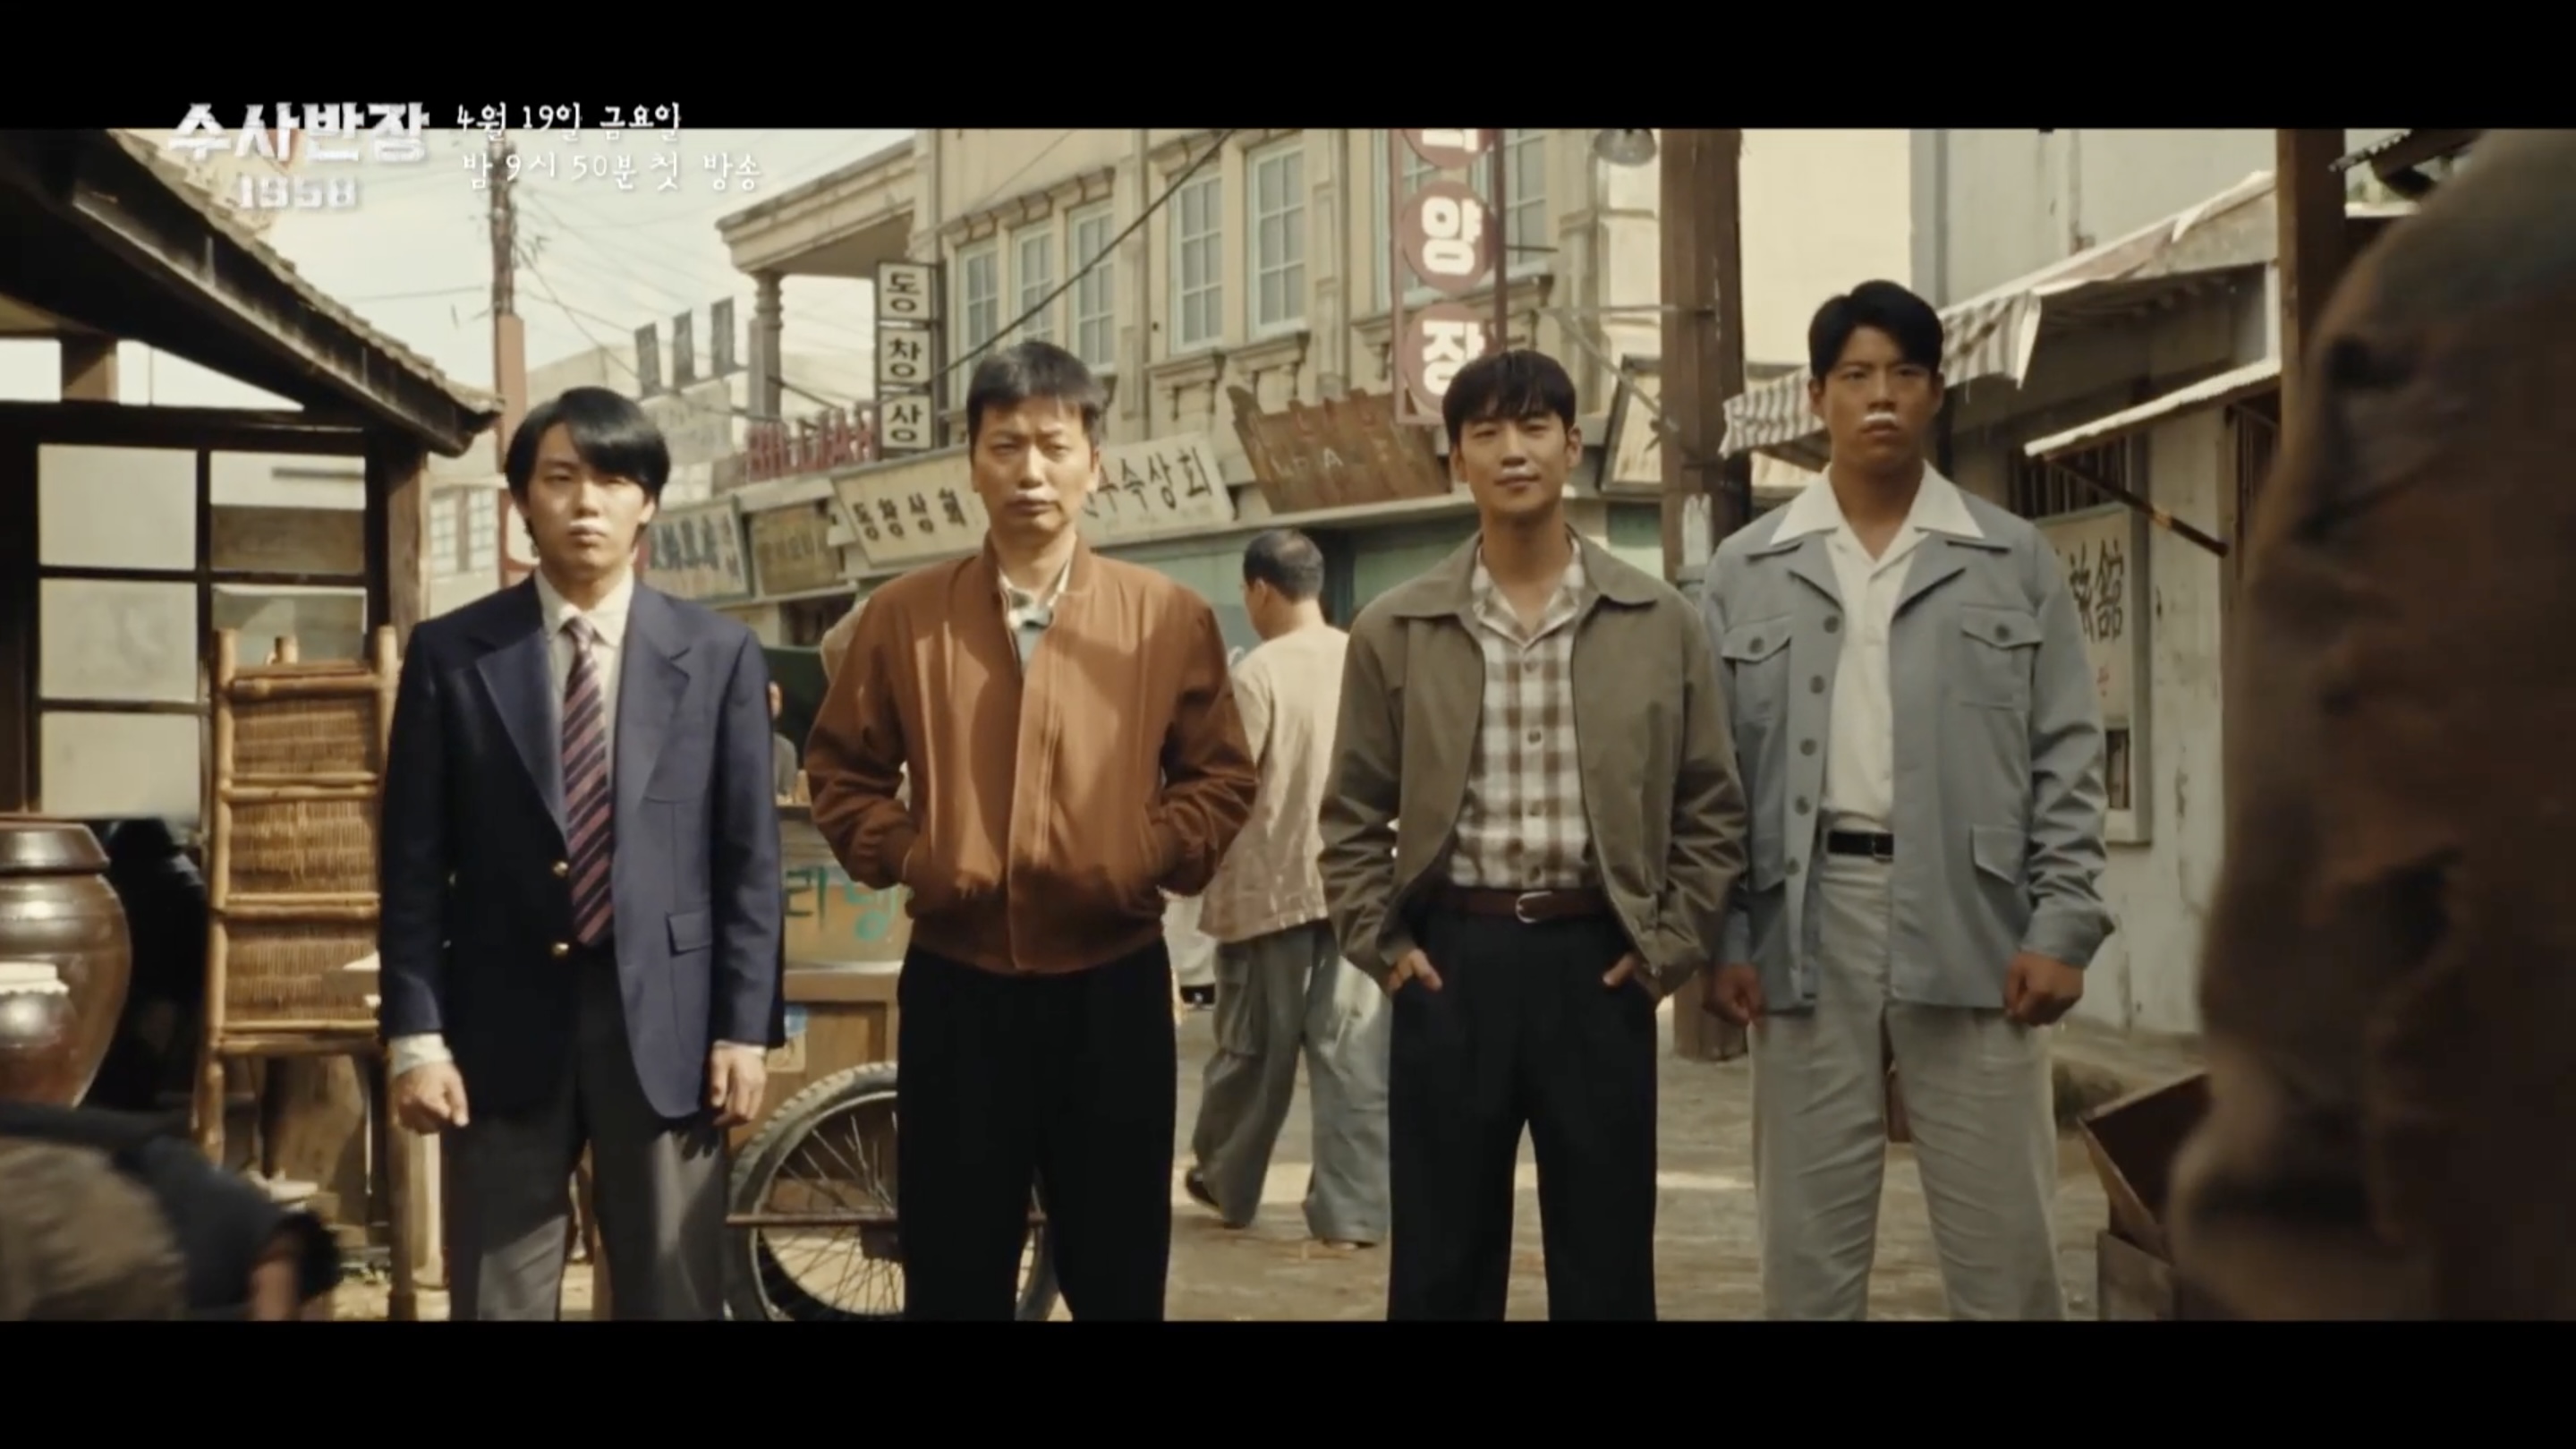 Case-cracking camaraderie with Chief Detective Lee Je-hoon